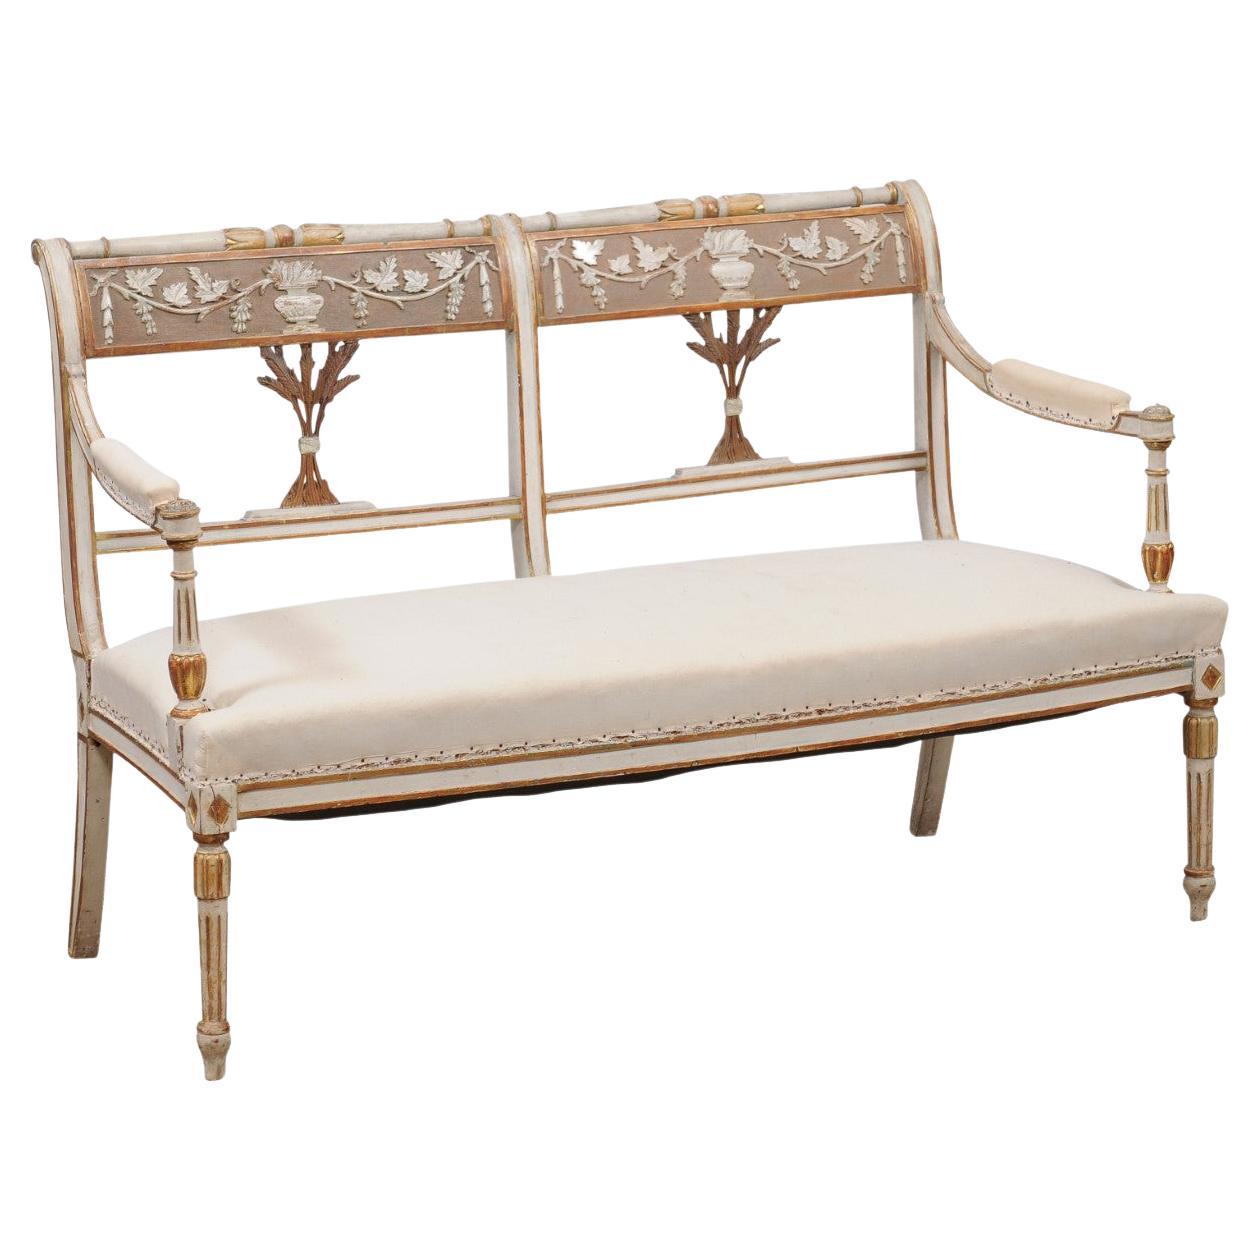 Late 19th Century Swedish Neoclassical Style Painted & Parcel Gilt Bench / Sette